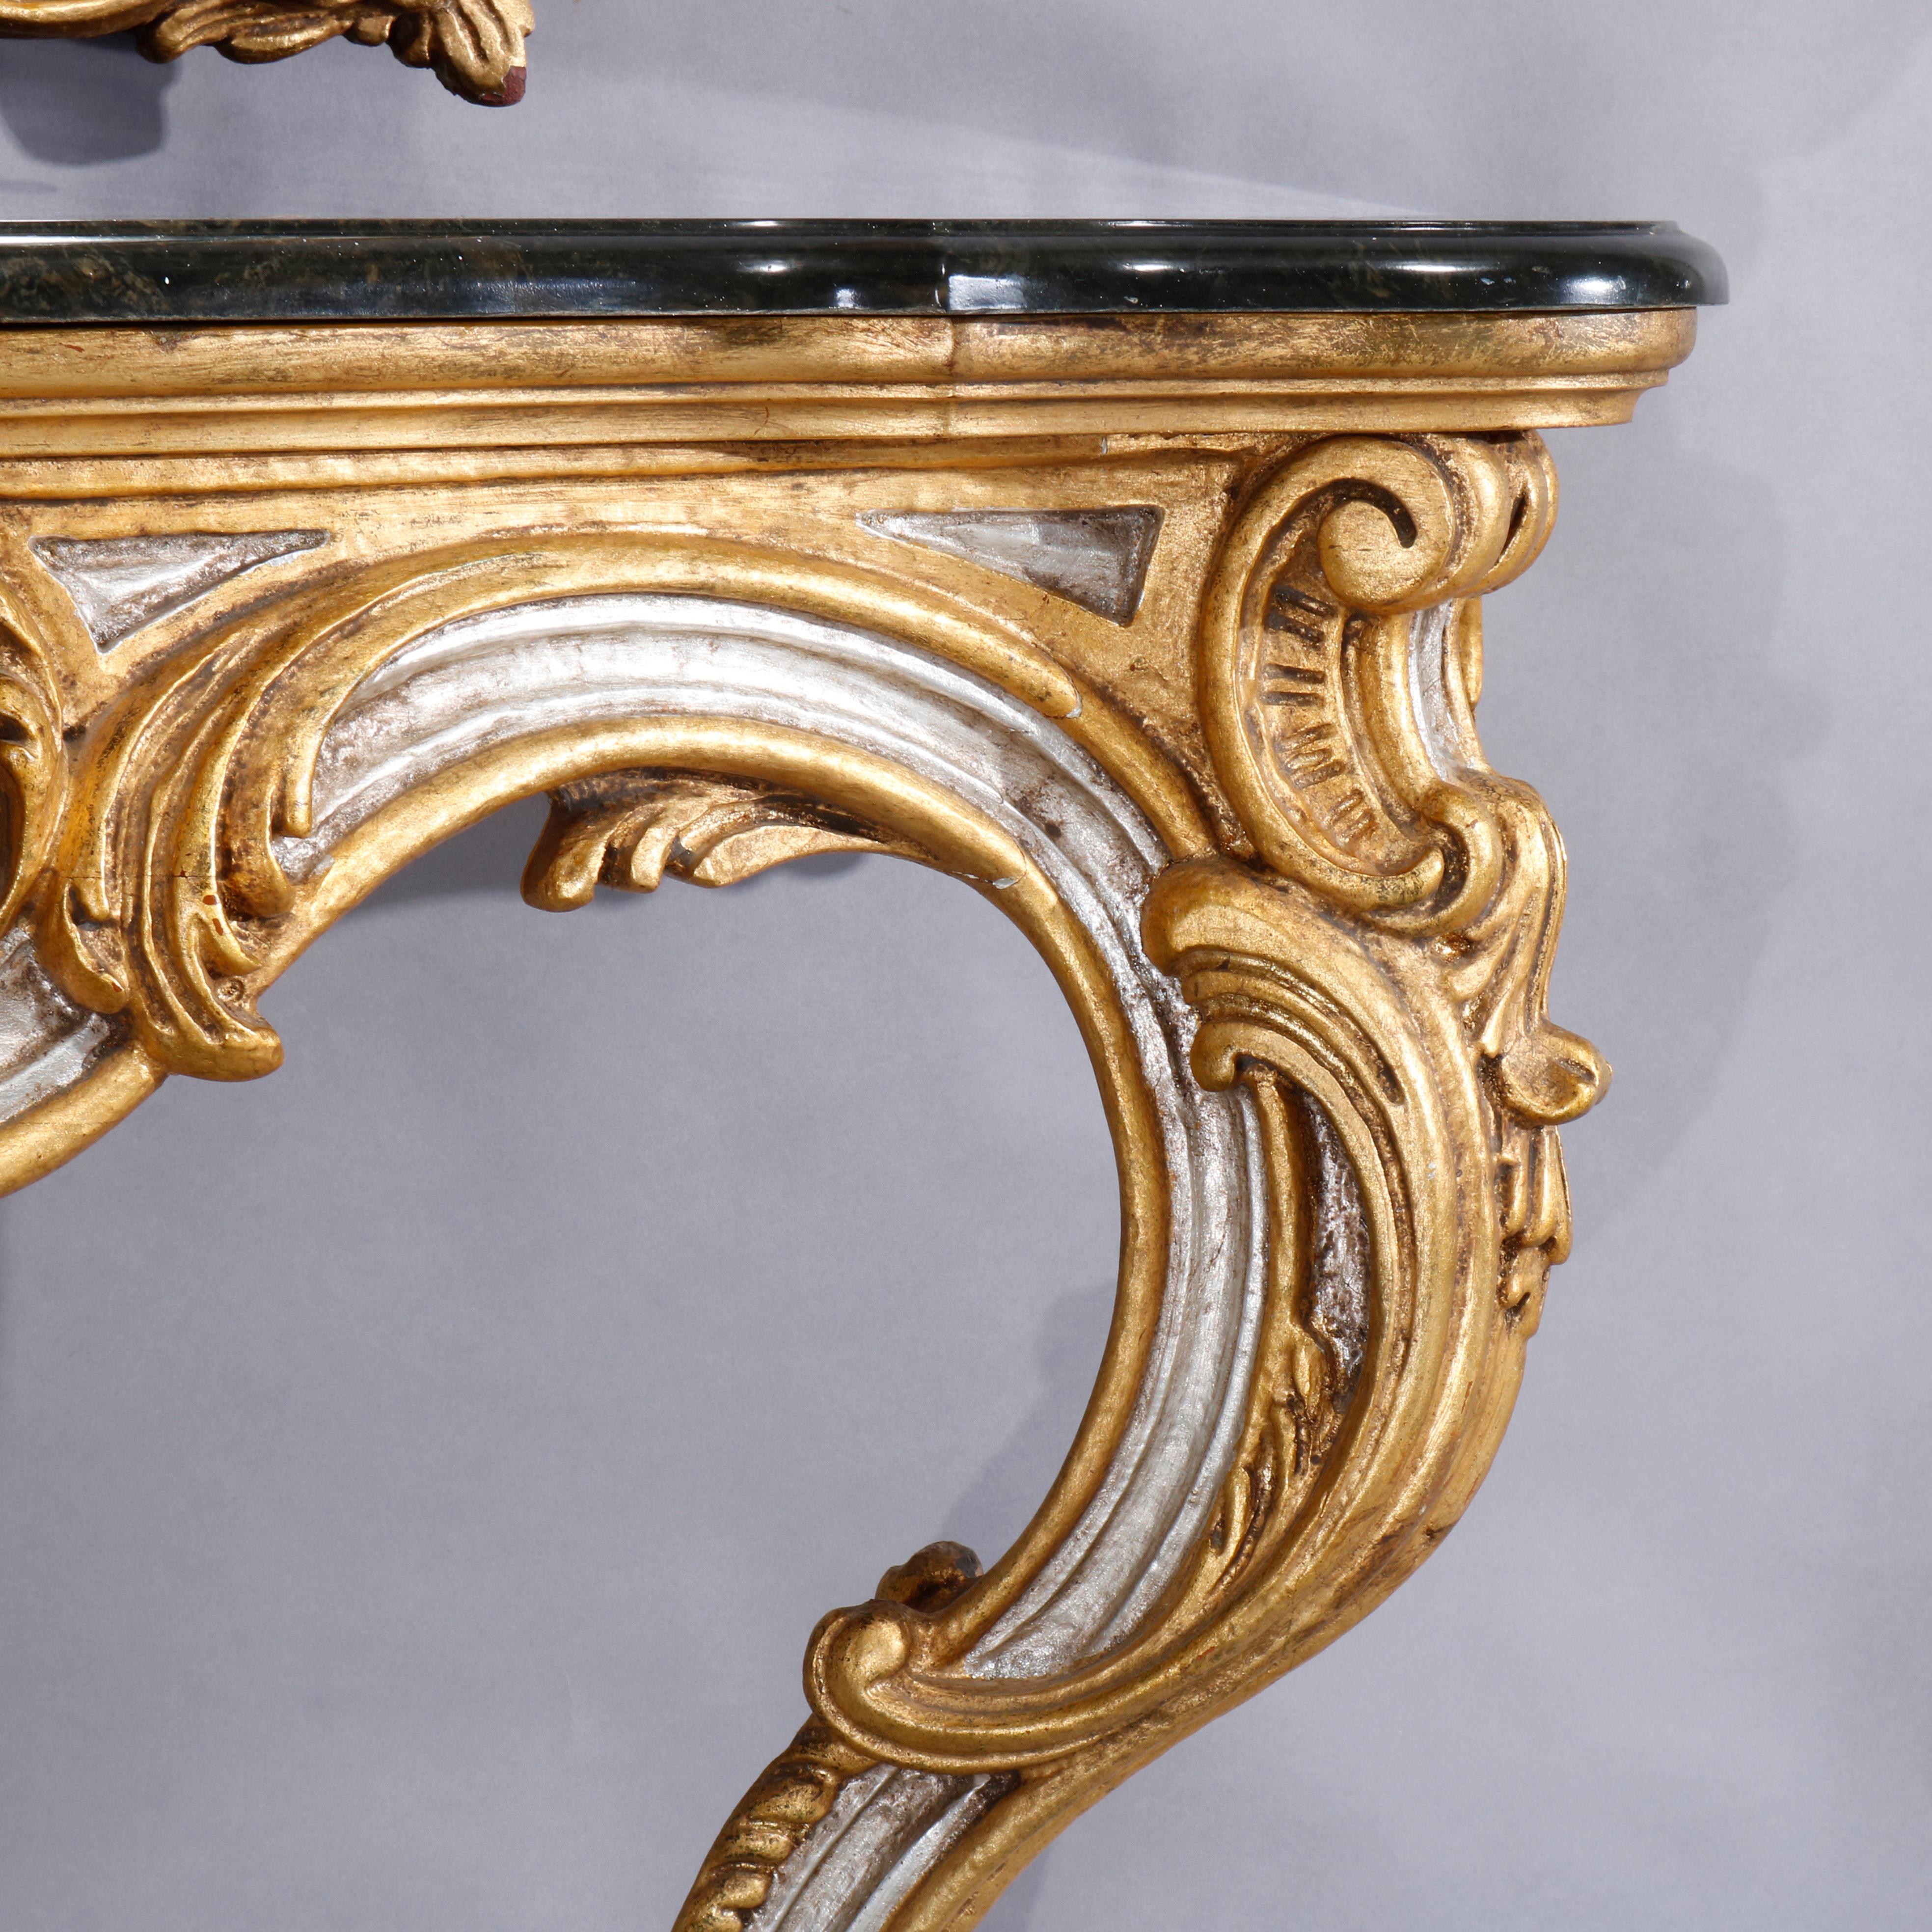 Mirror Vintage French Rococo Silver and Gold Gilt Marble Top Console by Hurtado